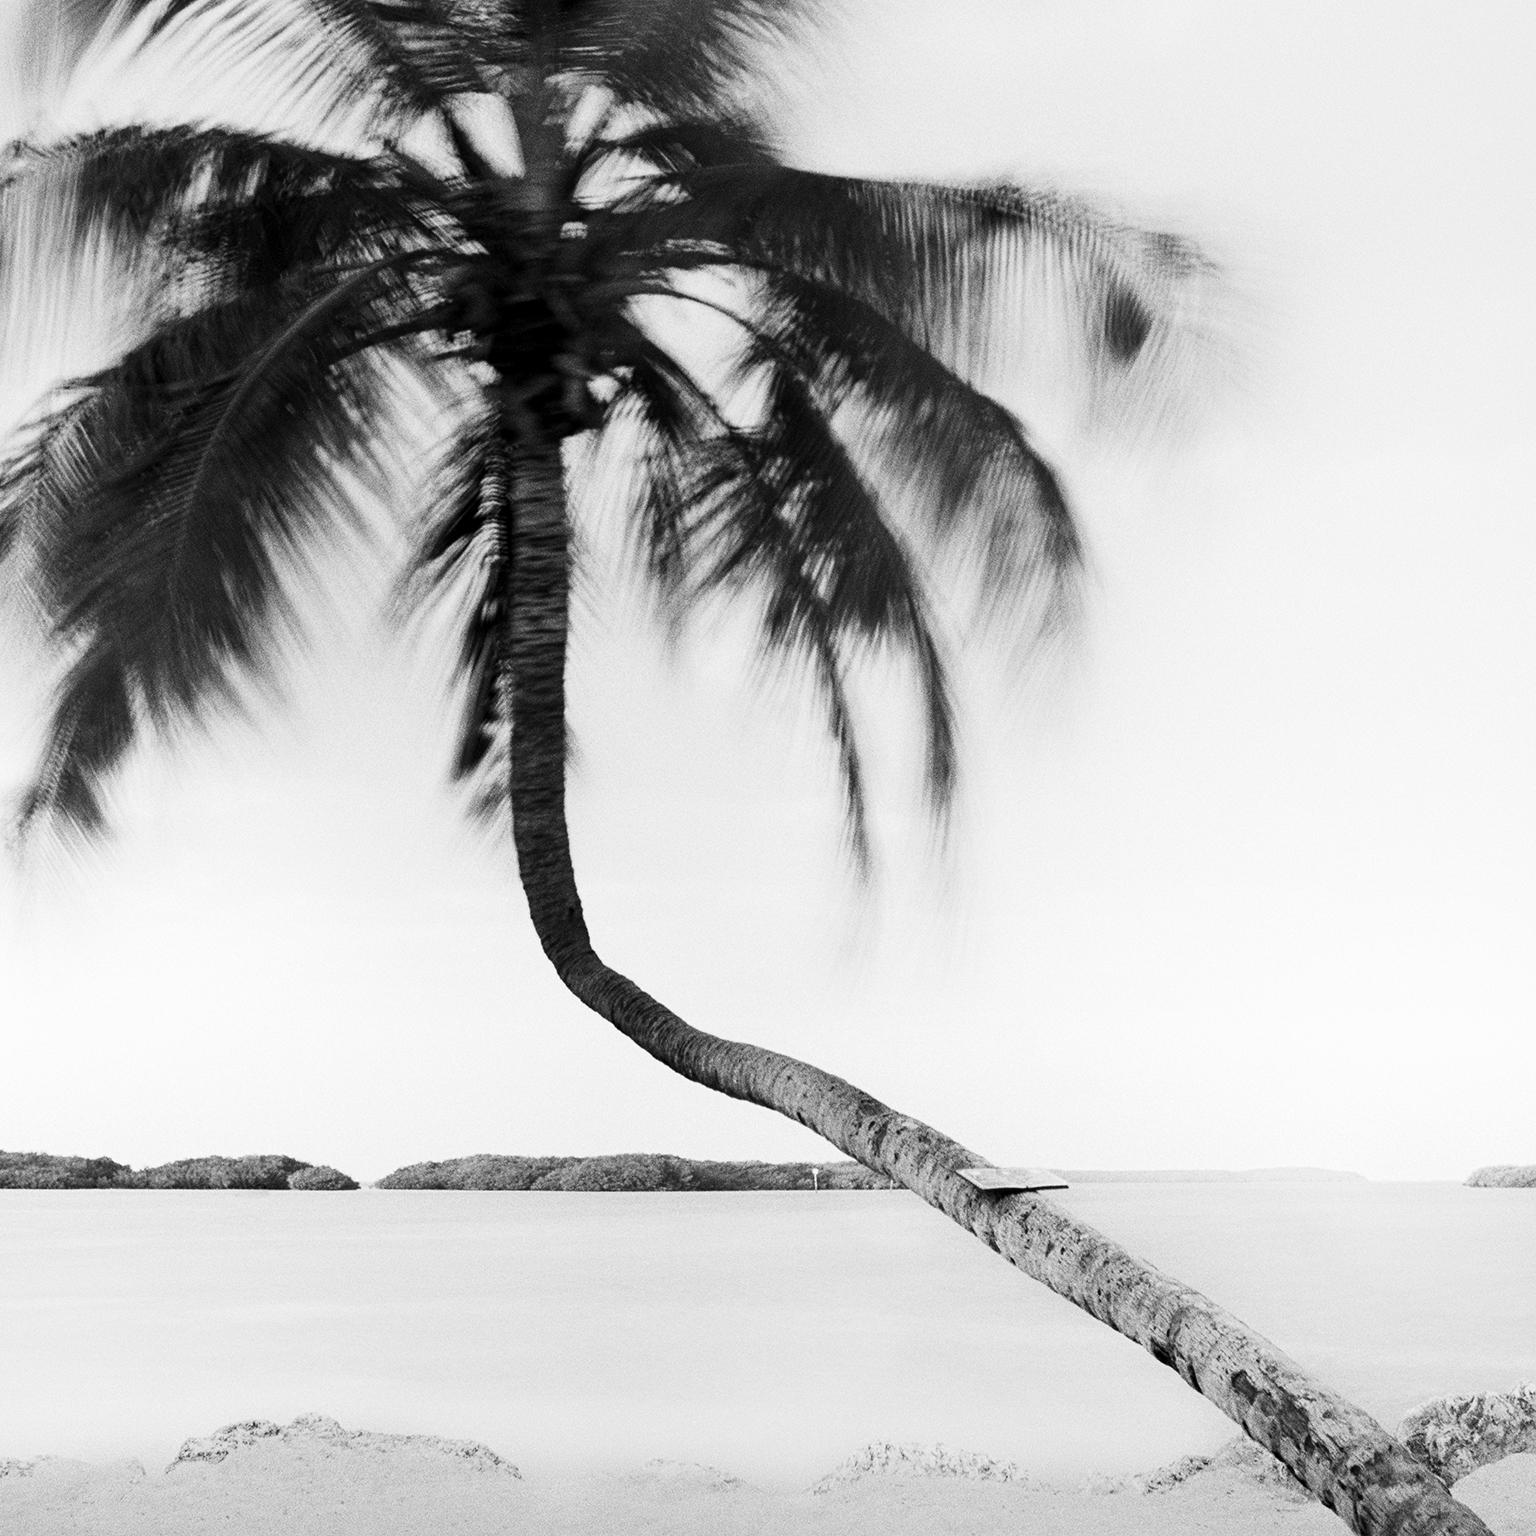 Bent Palm, Beach, Florida, USA, black and white fine art photography landscape - Photograph by Gerald Berghammer, Ina Forstinger